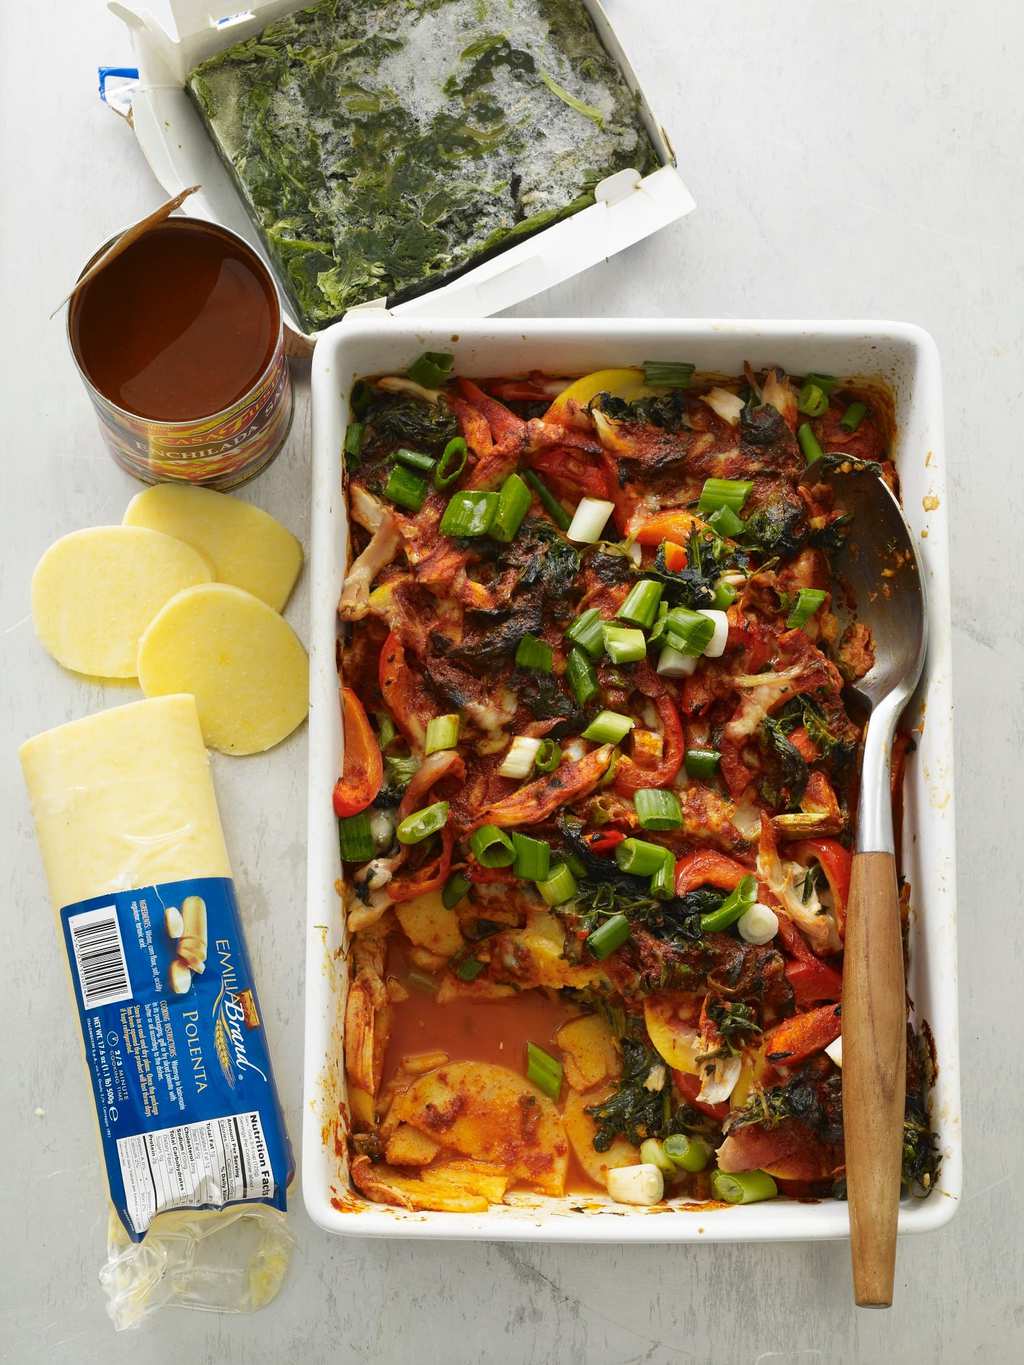 Spinach and Chicken Enchilada Casserole with ingredients